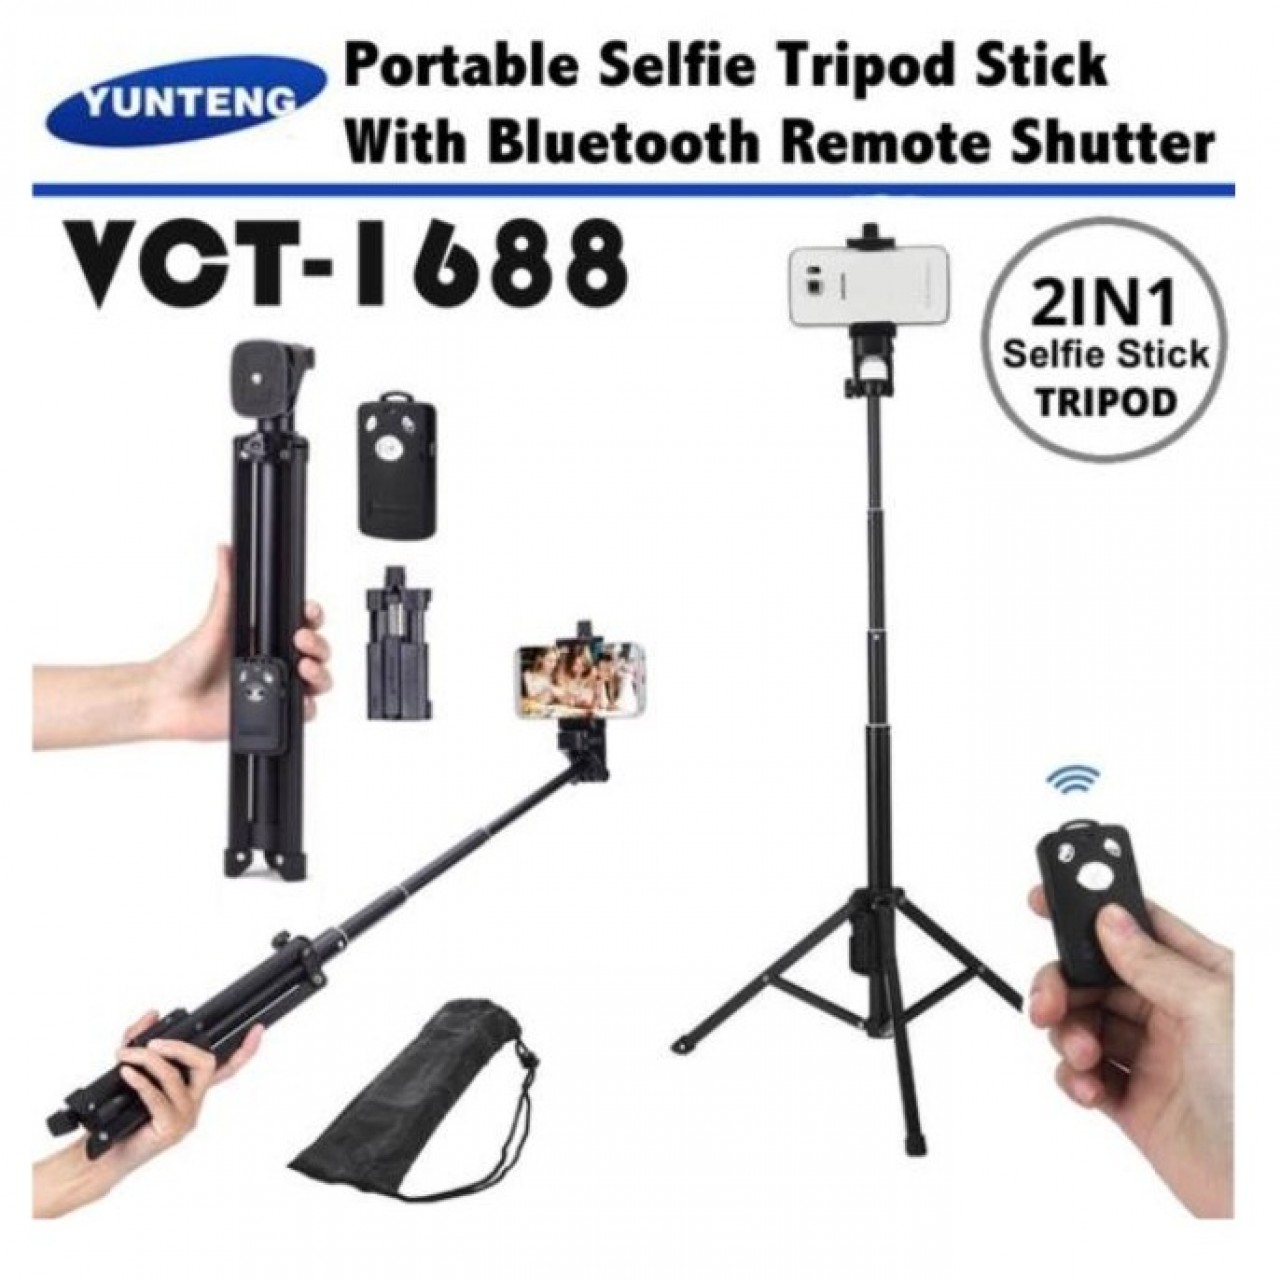 YUNTENG VCT-1688 STAND 2 IN 1 HAND TRIPOD